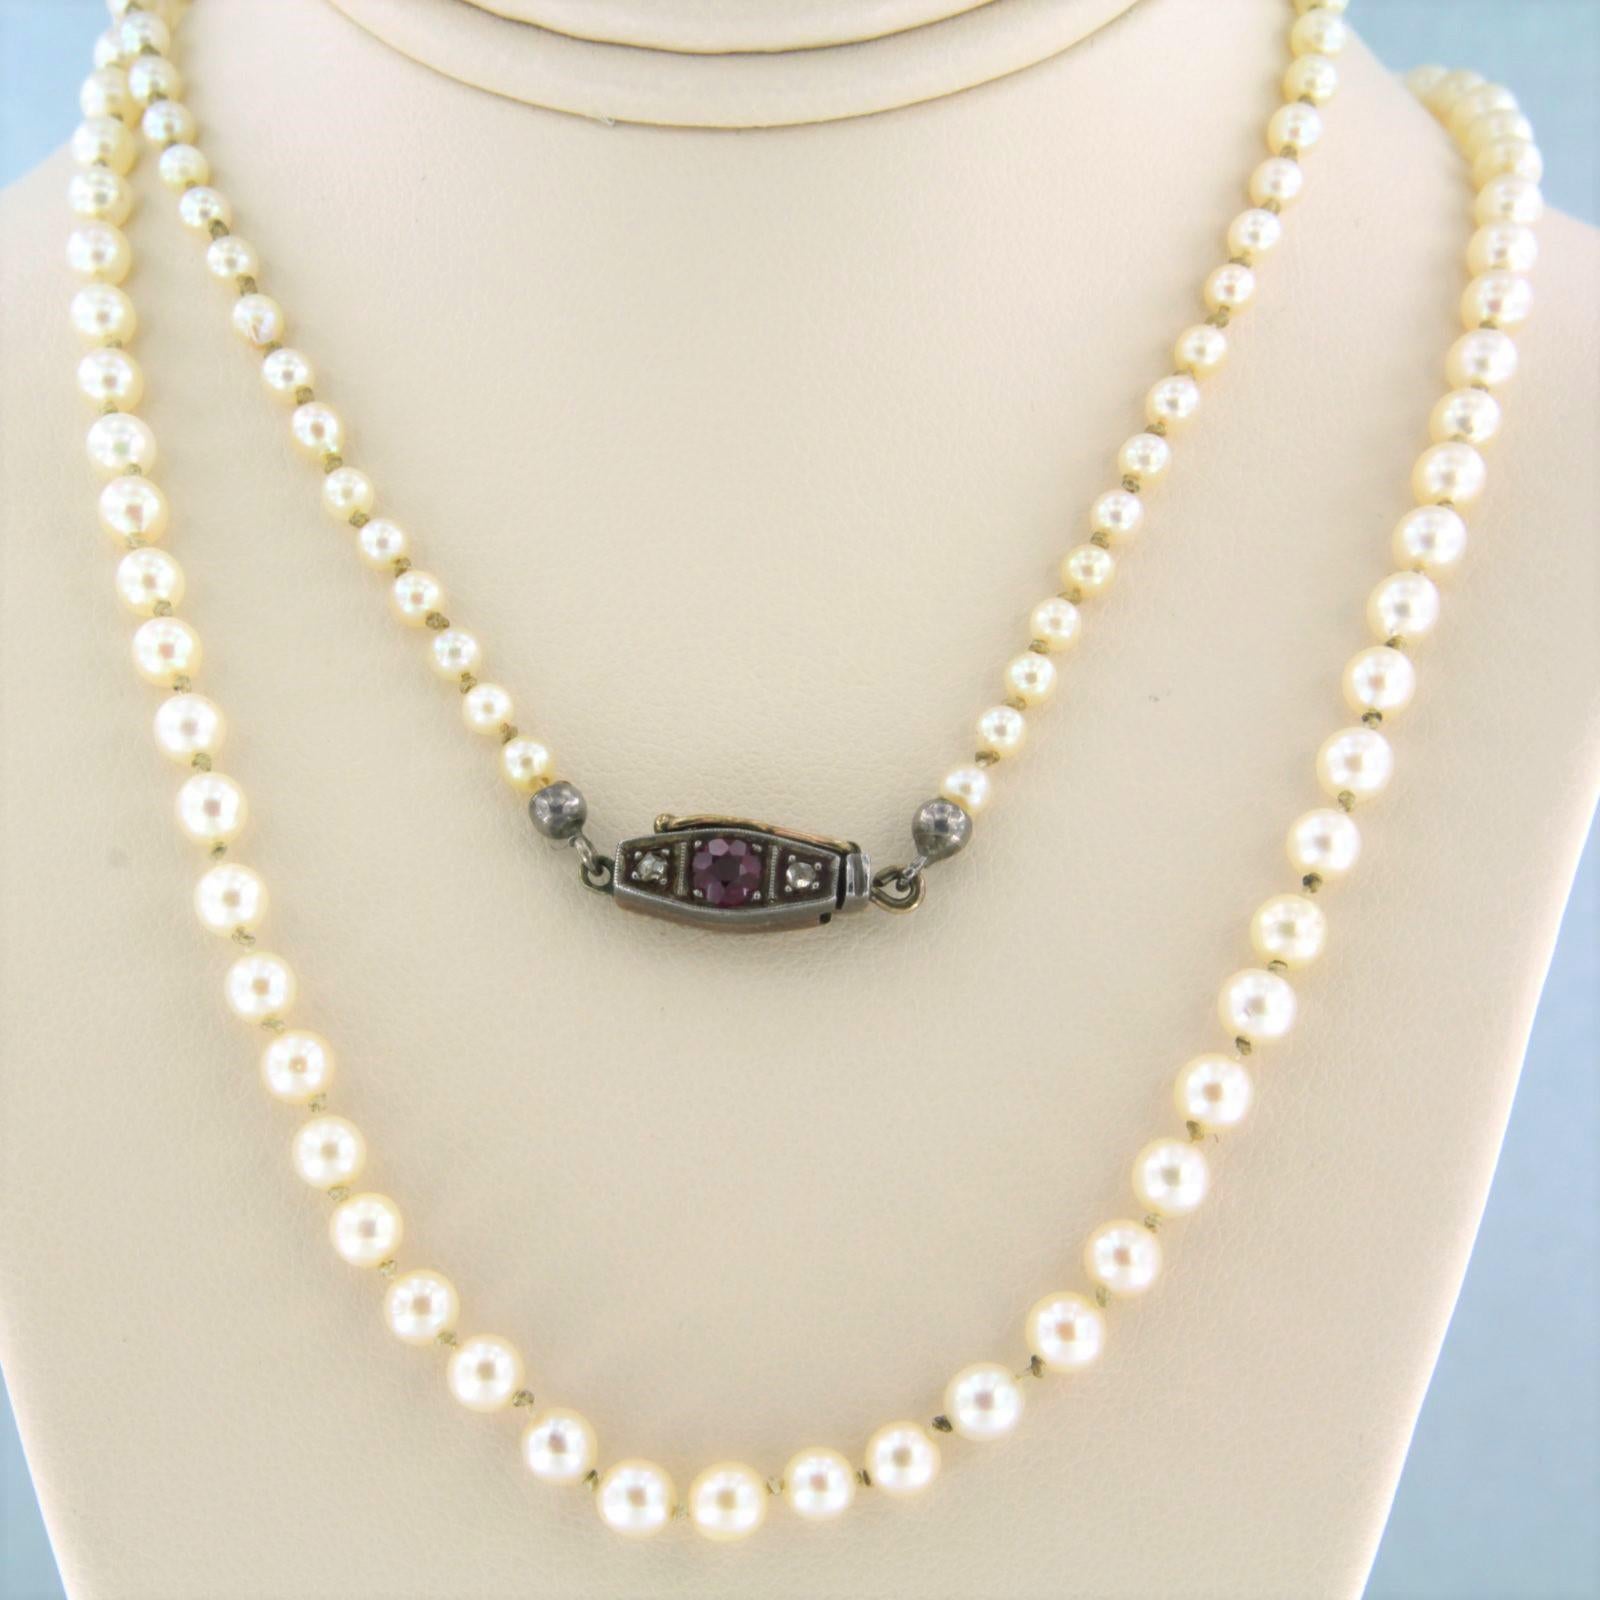 10k yellow gold with silver lock set with ruby ​​and rose diamonds on a pearl necklace - 60 cm long

detailed description

the length of the necklace is 60 cm long by 3.8 mm wide

the size of the lock is 2.5 cm long by 5.6 mm wide

the slot is made